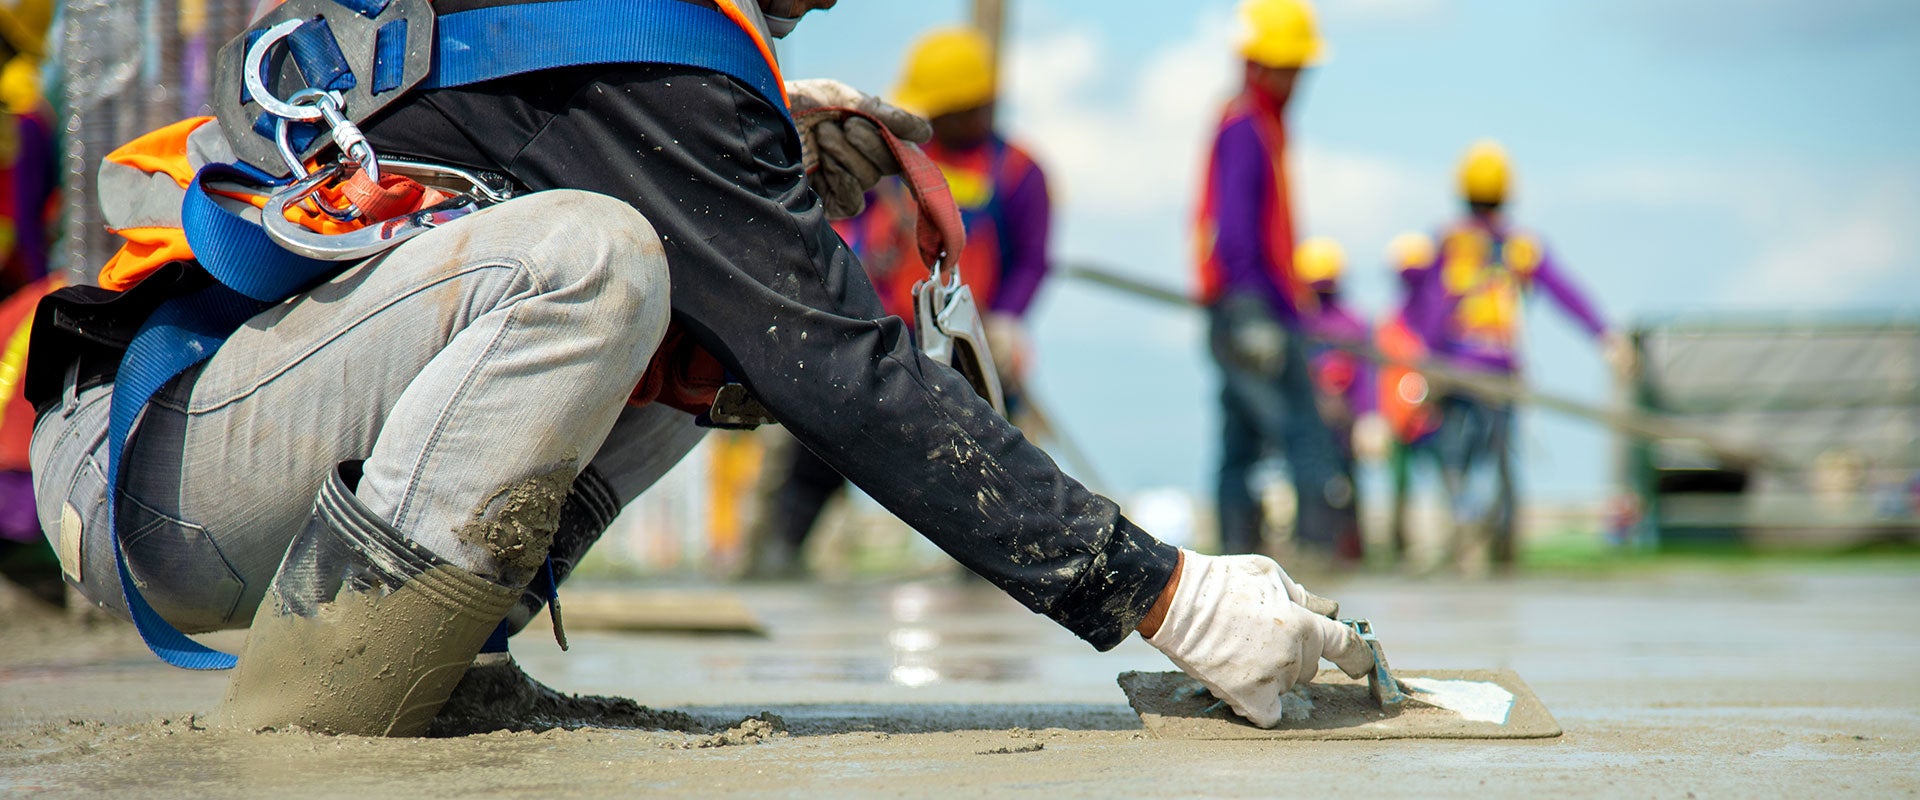 construction worker smoothing concrete